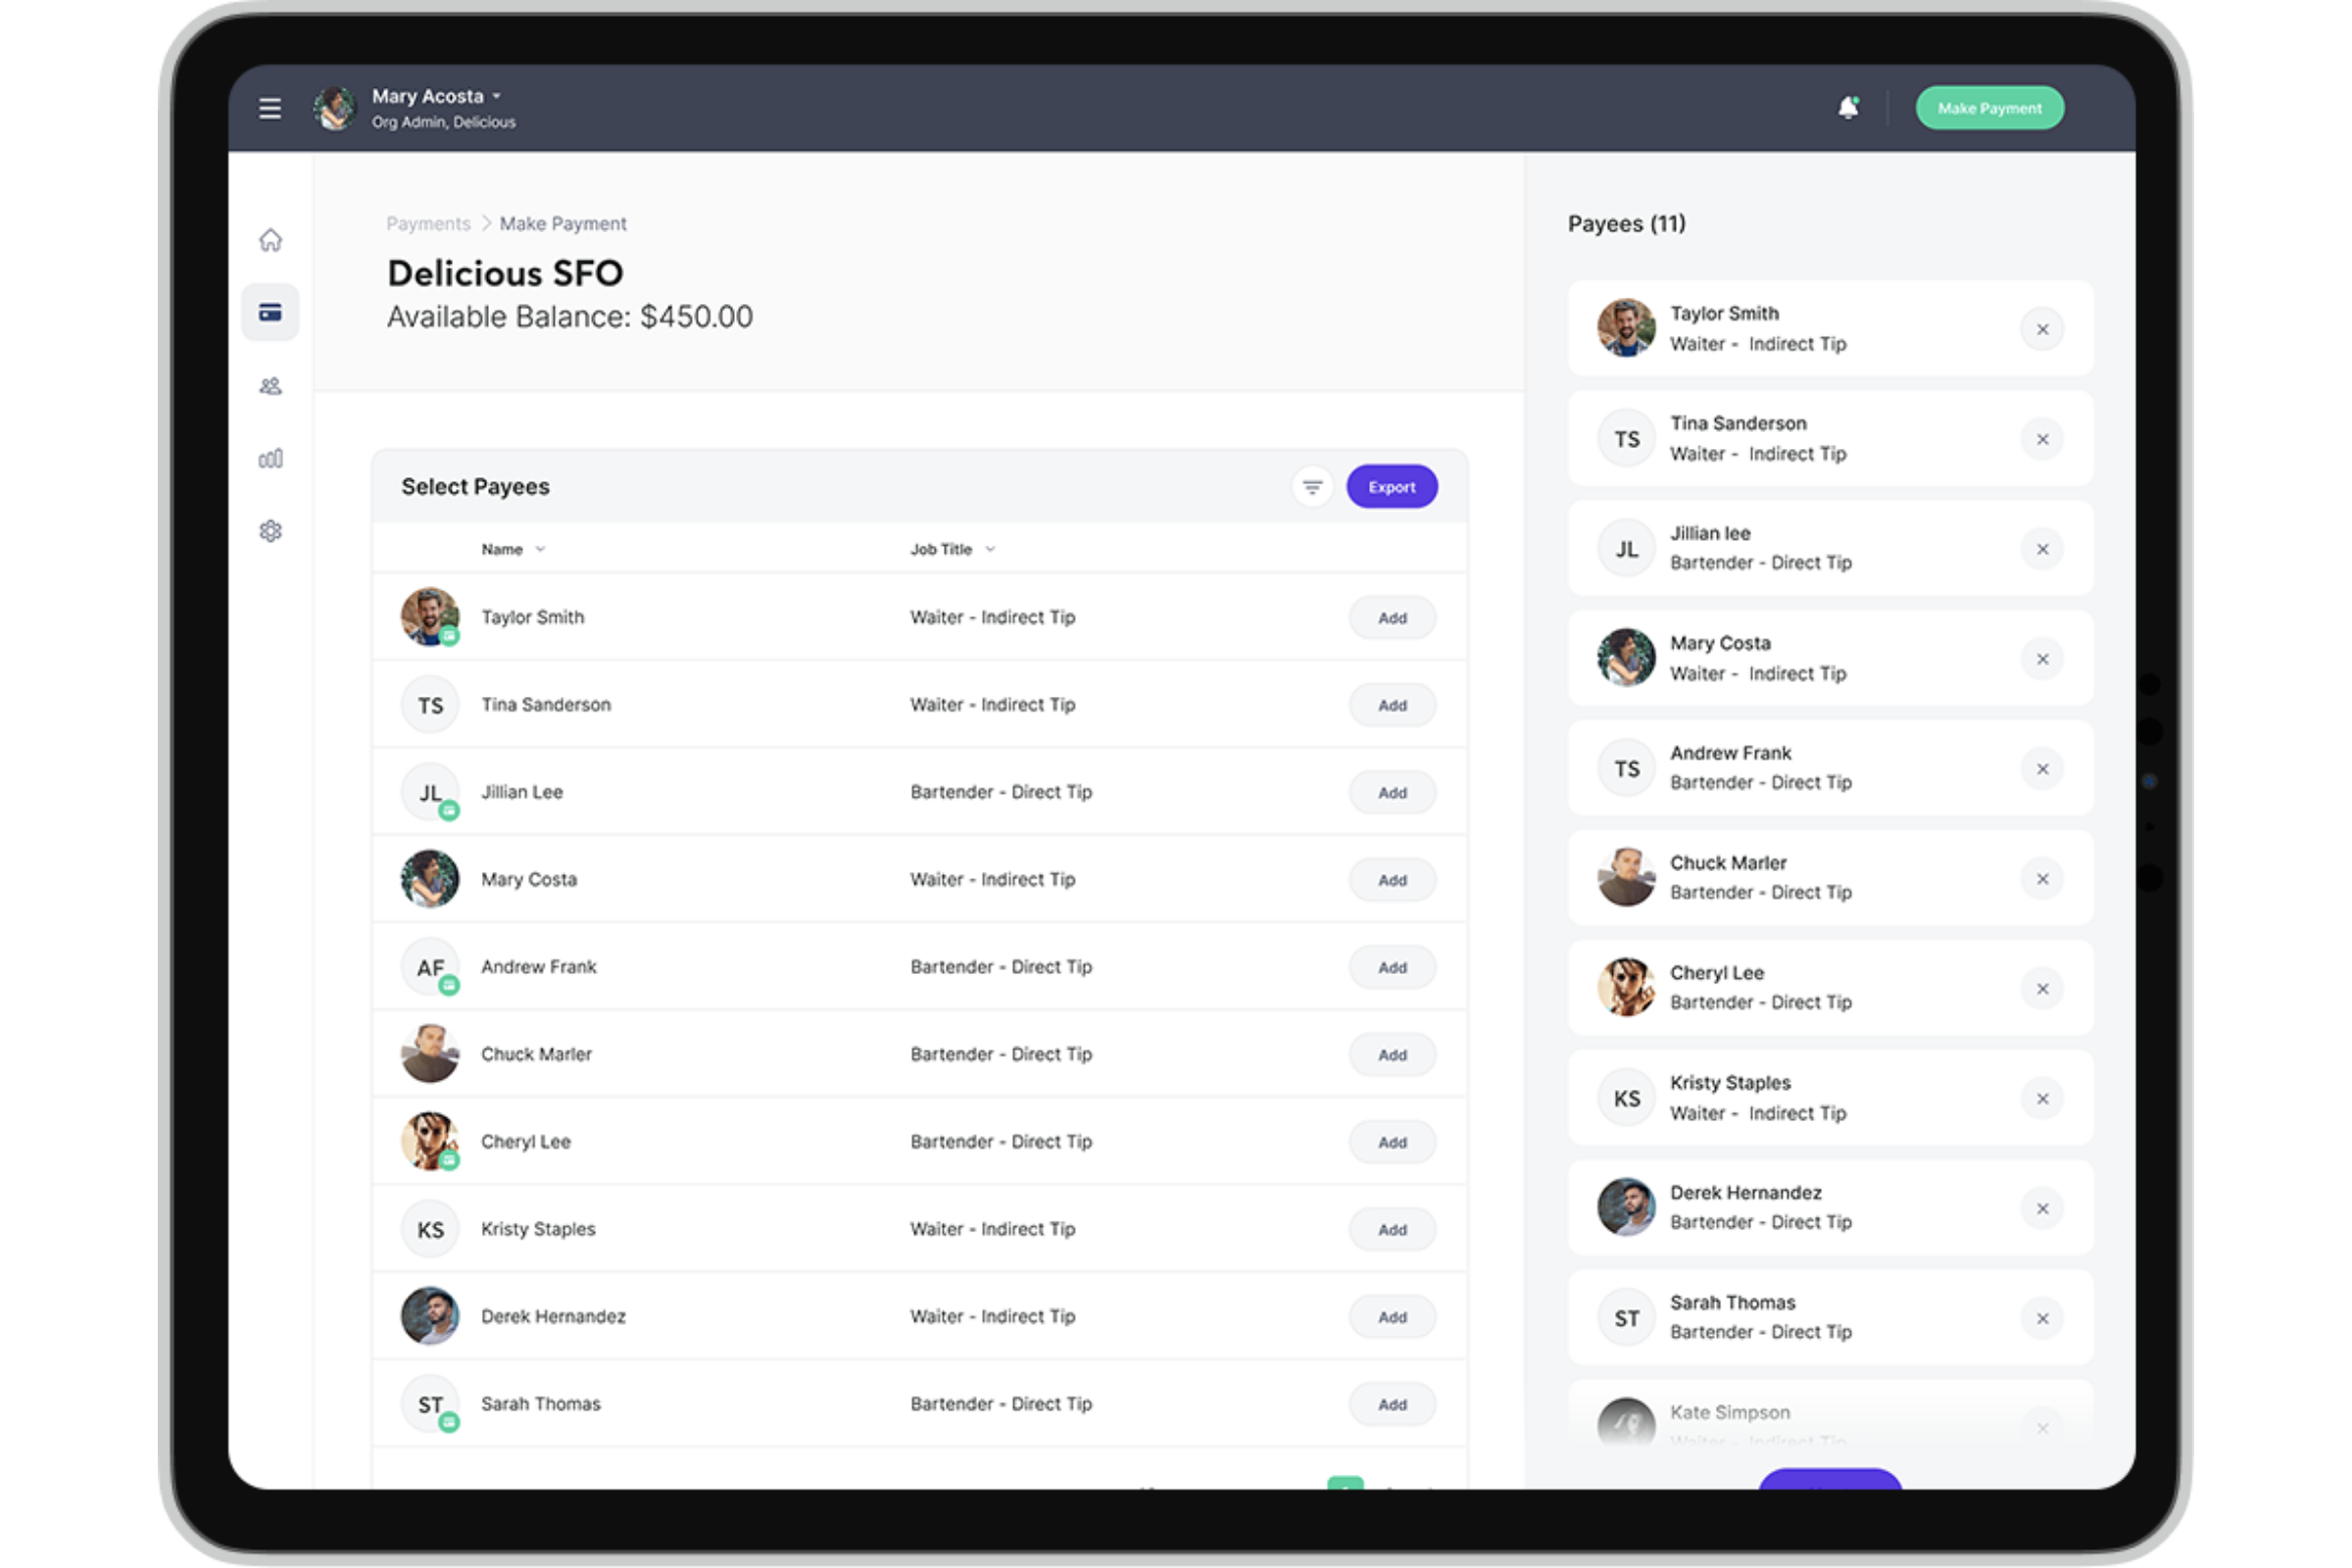 Kickfin dashboard: After setting up your locations, you can see all employees at each location. When you're ready to distribute tips, you'll simply select the employees who worked that shift.